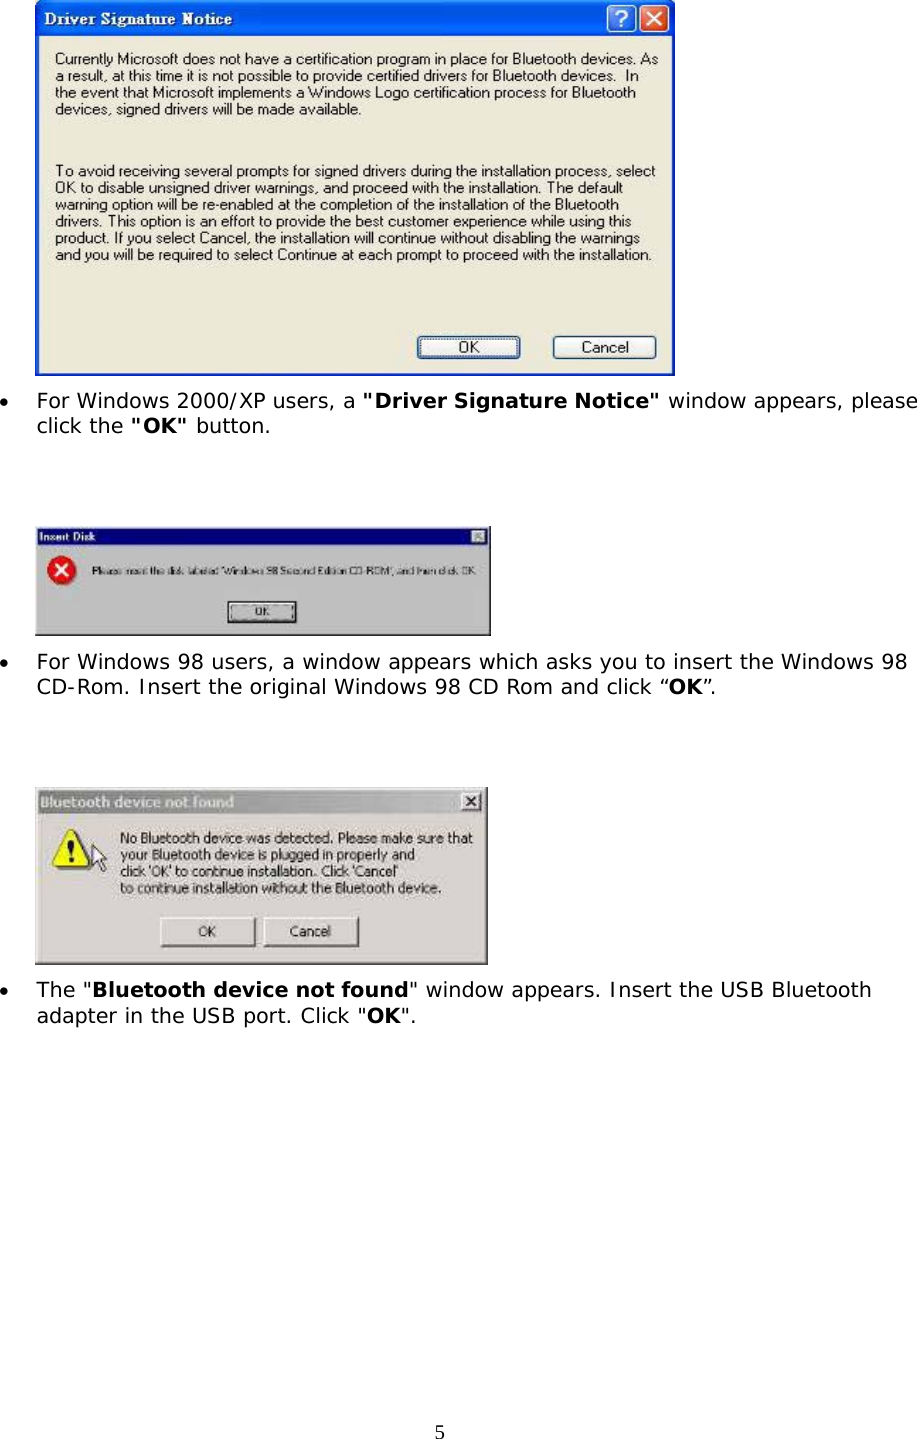 5  •  For Windows 2000/XP users, a &quot;Driver Signature Notice&quot; window appears, please click the &quot;OK&quot; button.      •  For Windows 98 users, a window appears which asks you to insert the Windows 98 CD-Rom. Insert the original Windows 98 CD Rom and click “OK”.    •  The &quot;Bluetooth device not found&quot; window appears. Insert the USB Bluetooth adapter in the USB port. Click &quot;OK&quot;. 